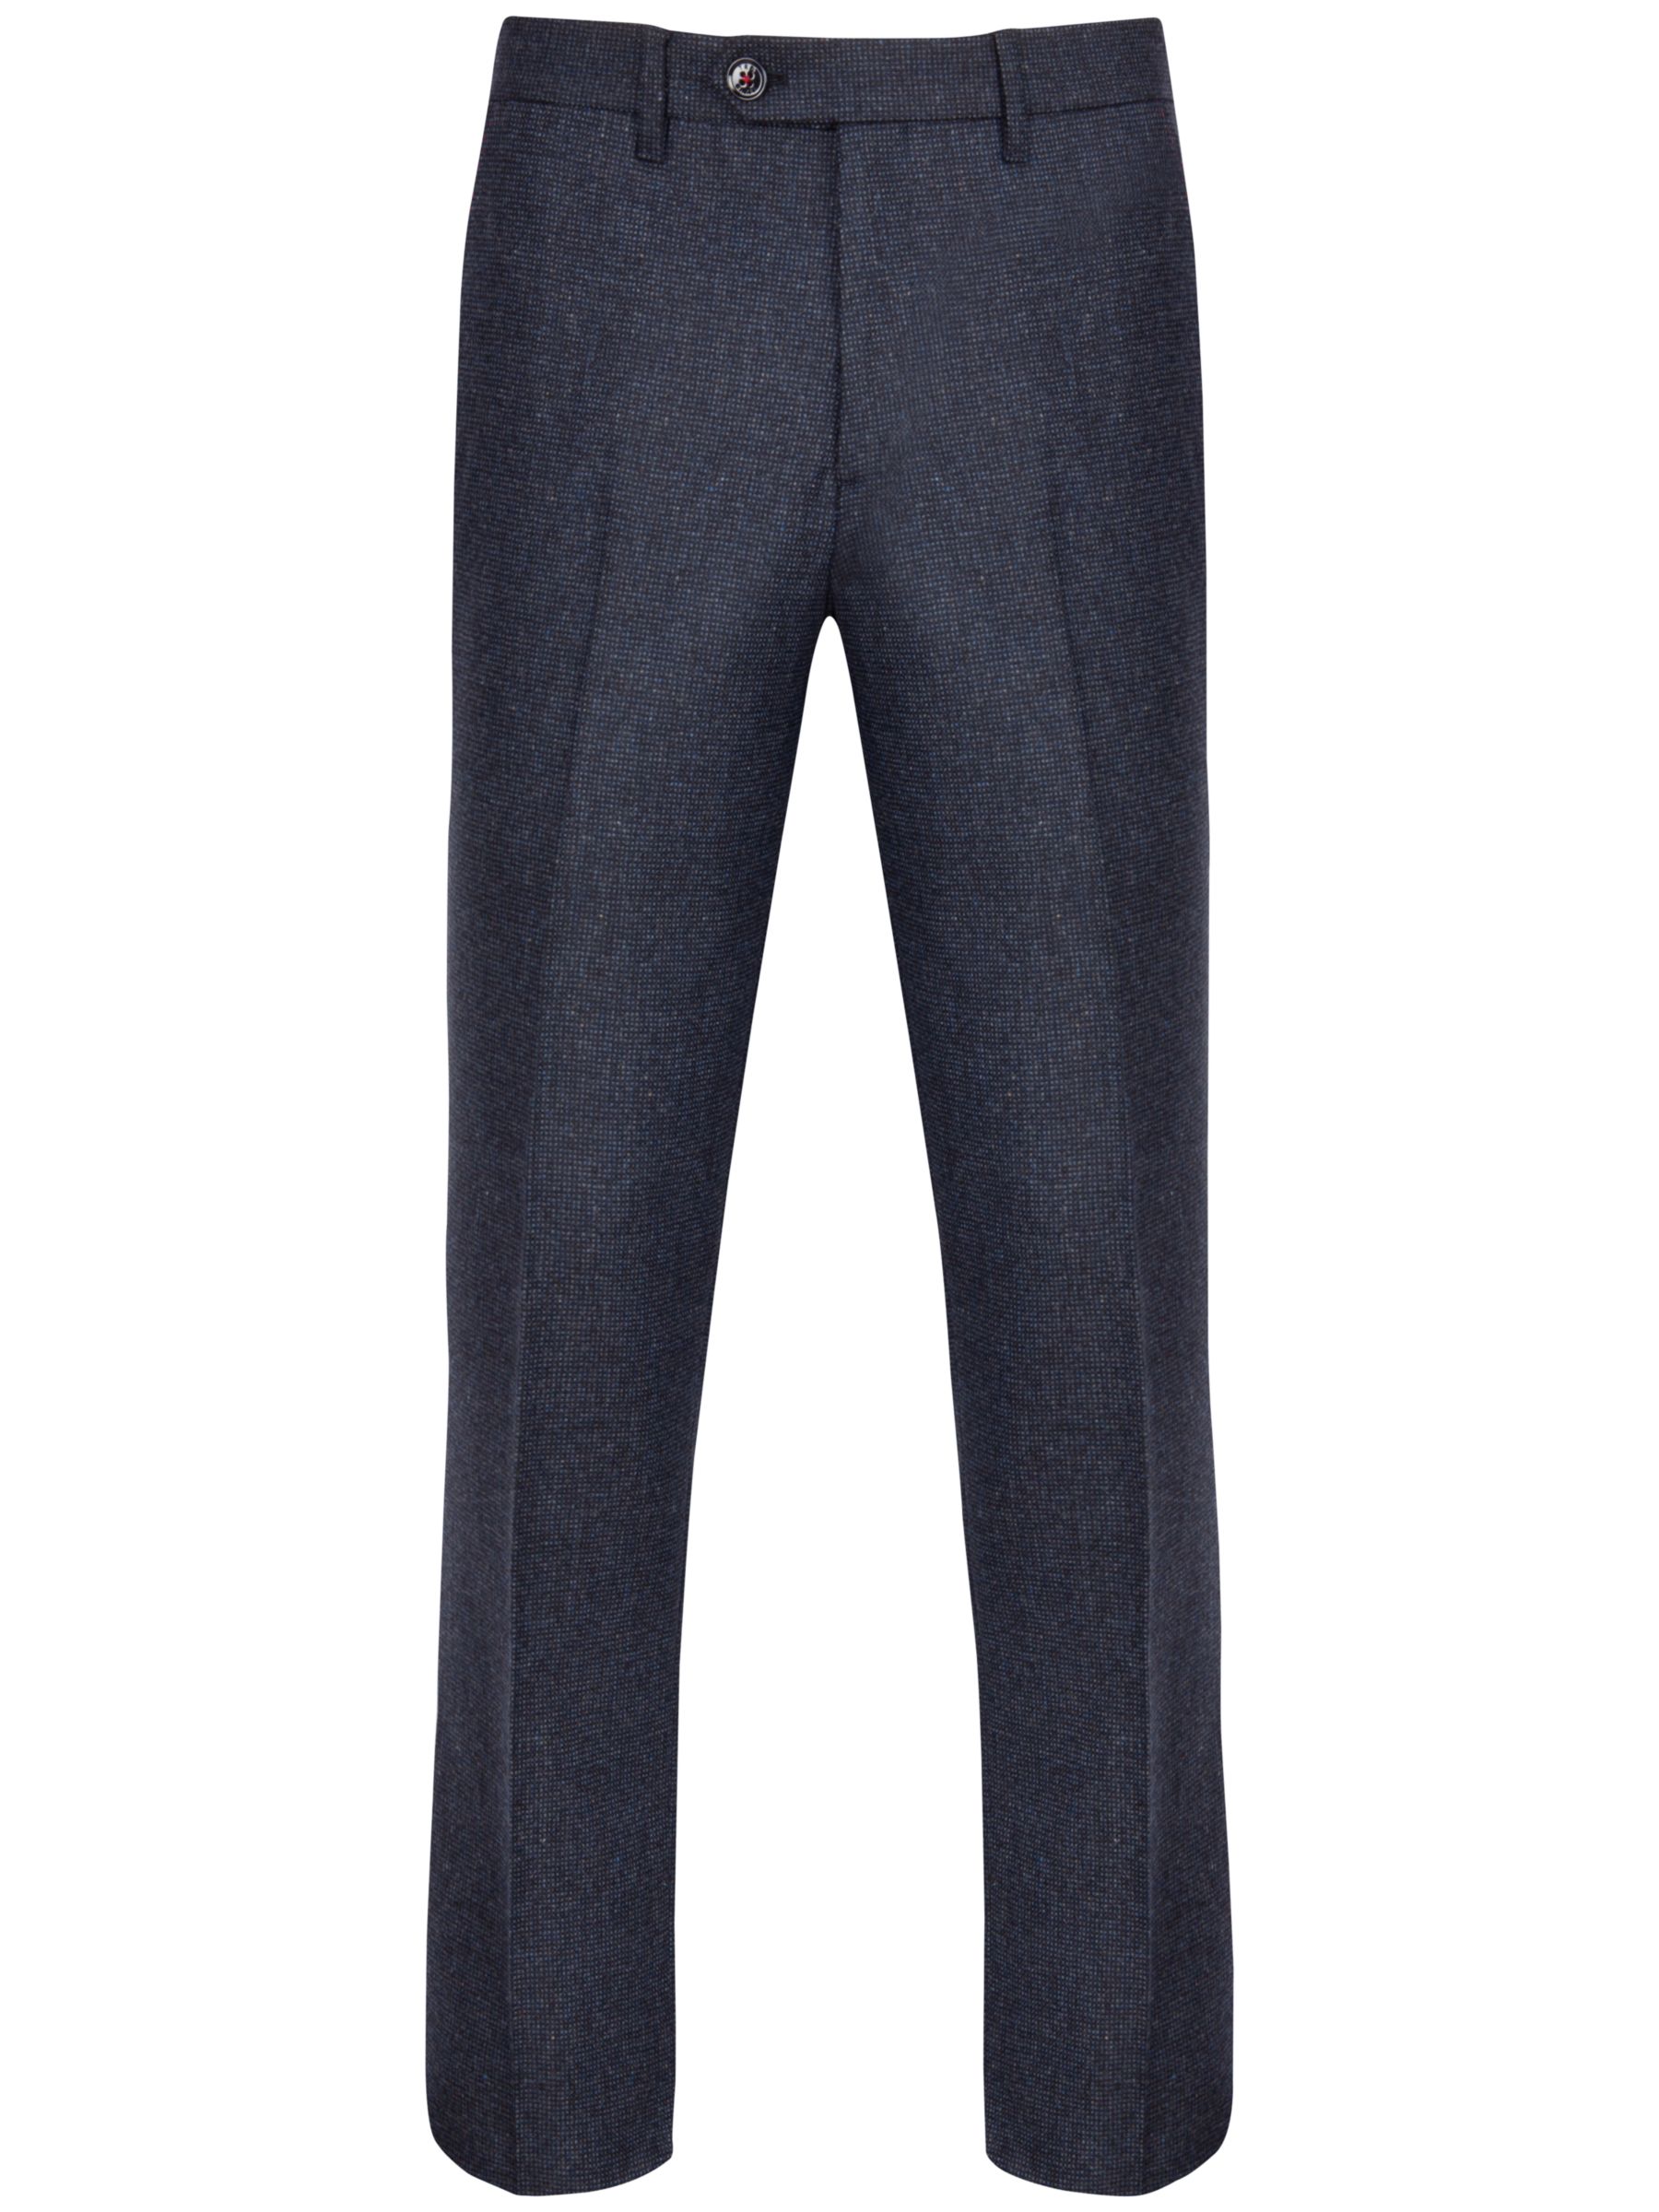 Ted Baker Edetro Micro Textured Suit Trousers, Navy